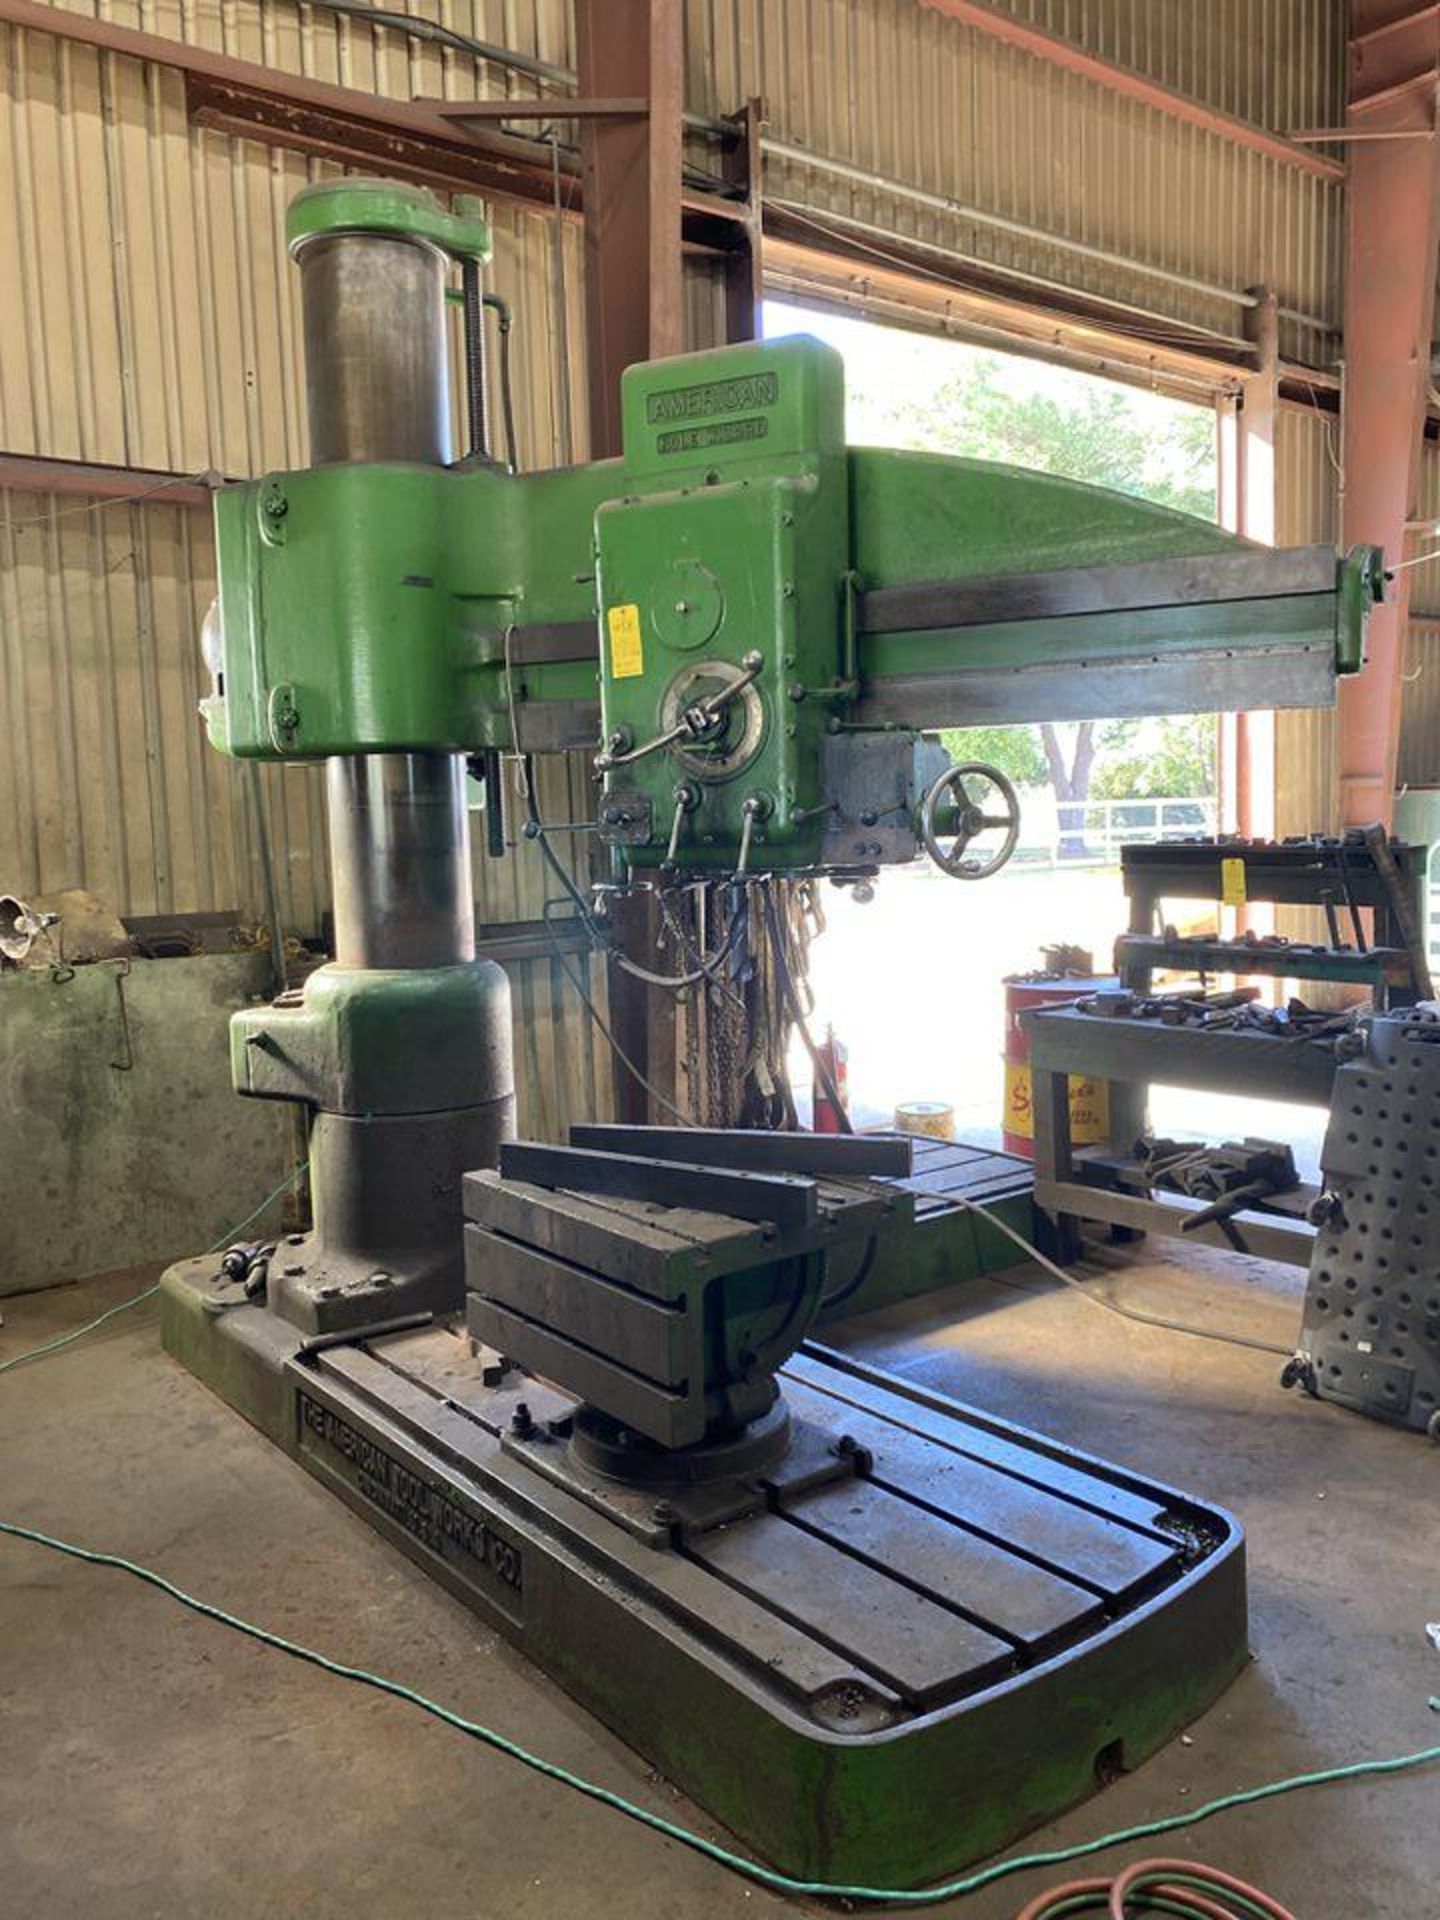 6' 15" American Hole Wizard Radial Arm Drill